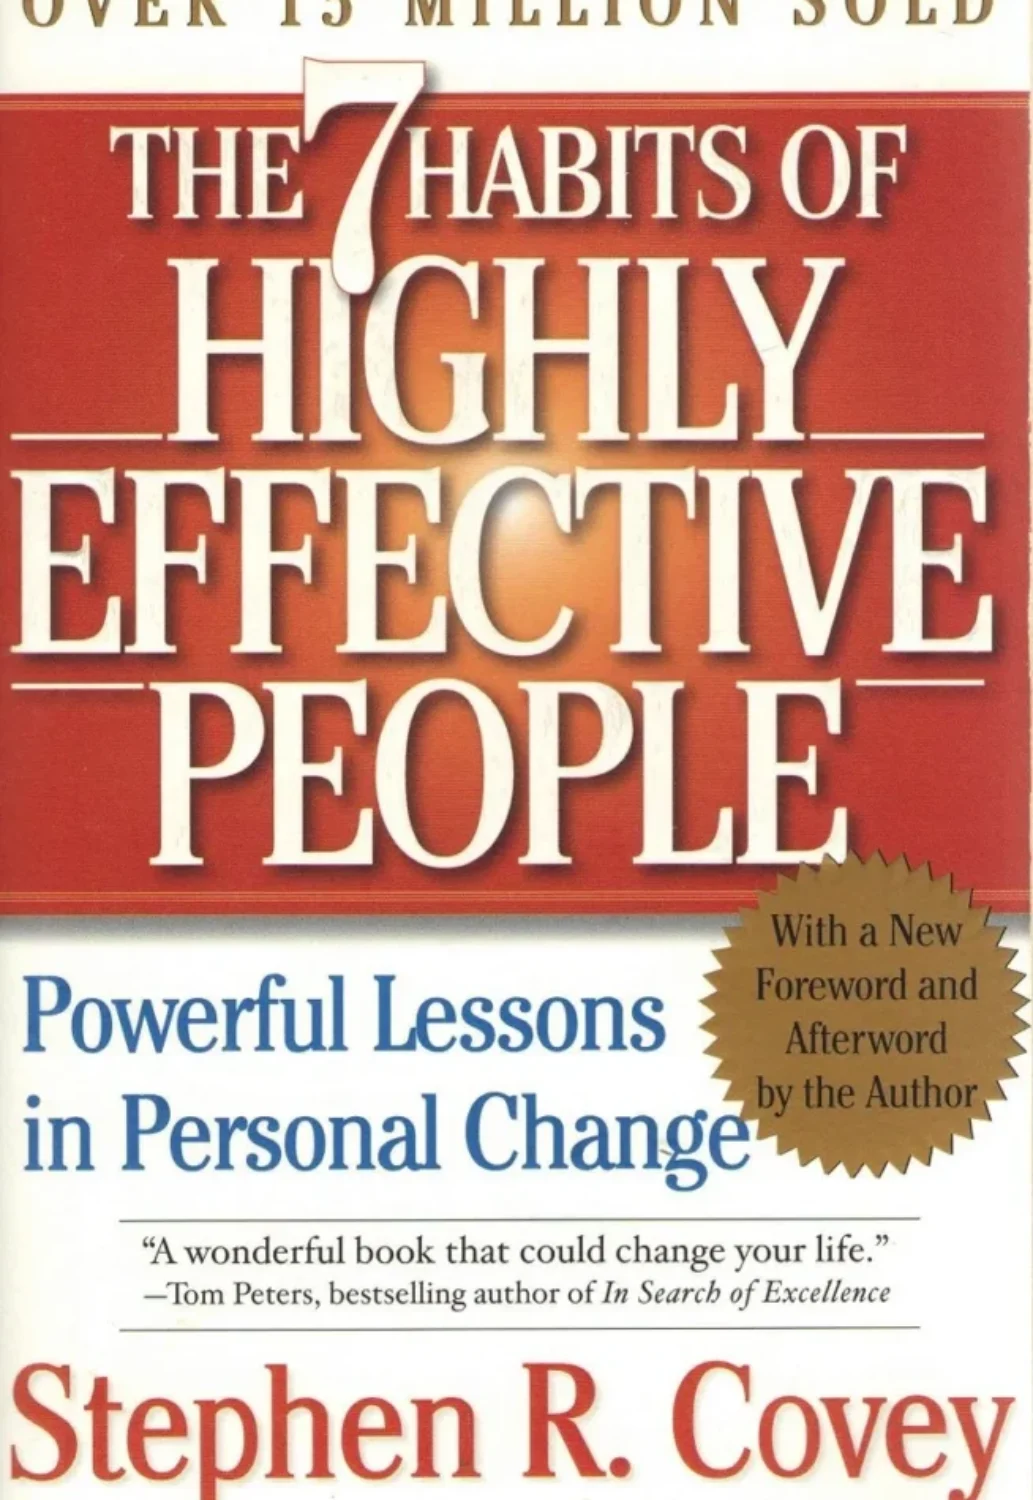 The 7 Habits of Highly Effective People by Stephen R Covey